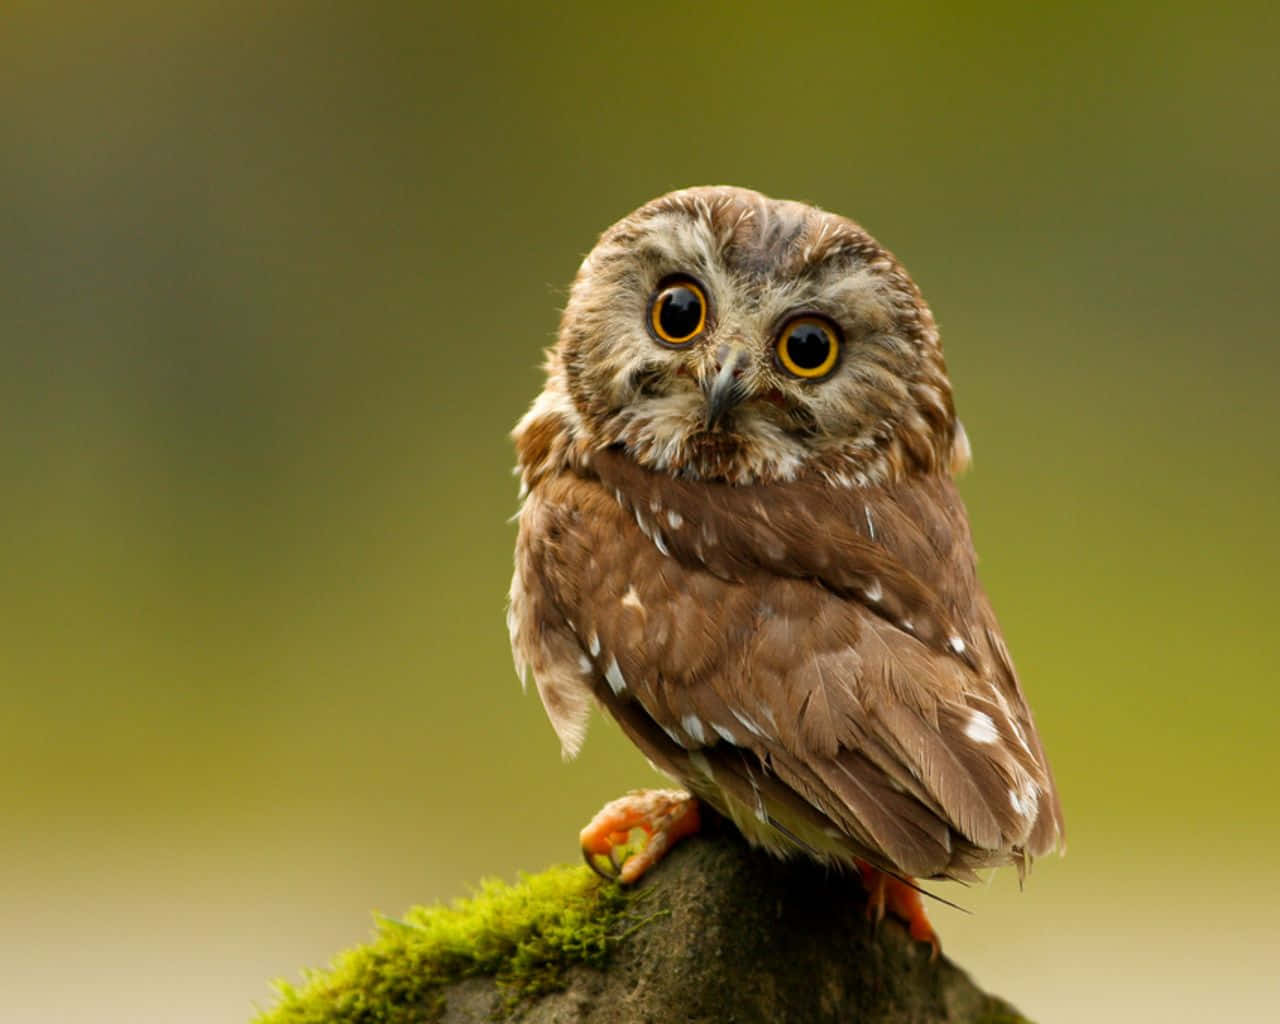 Take A Peek at These Wise But Cute Owls